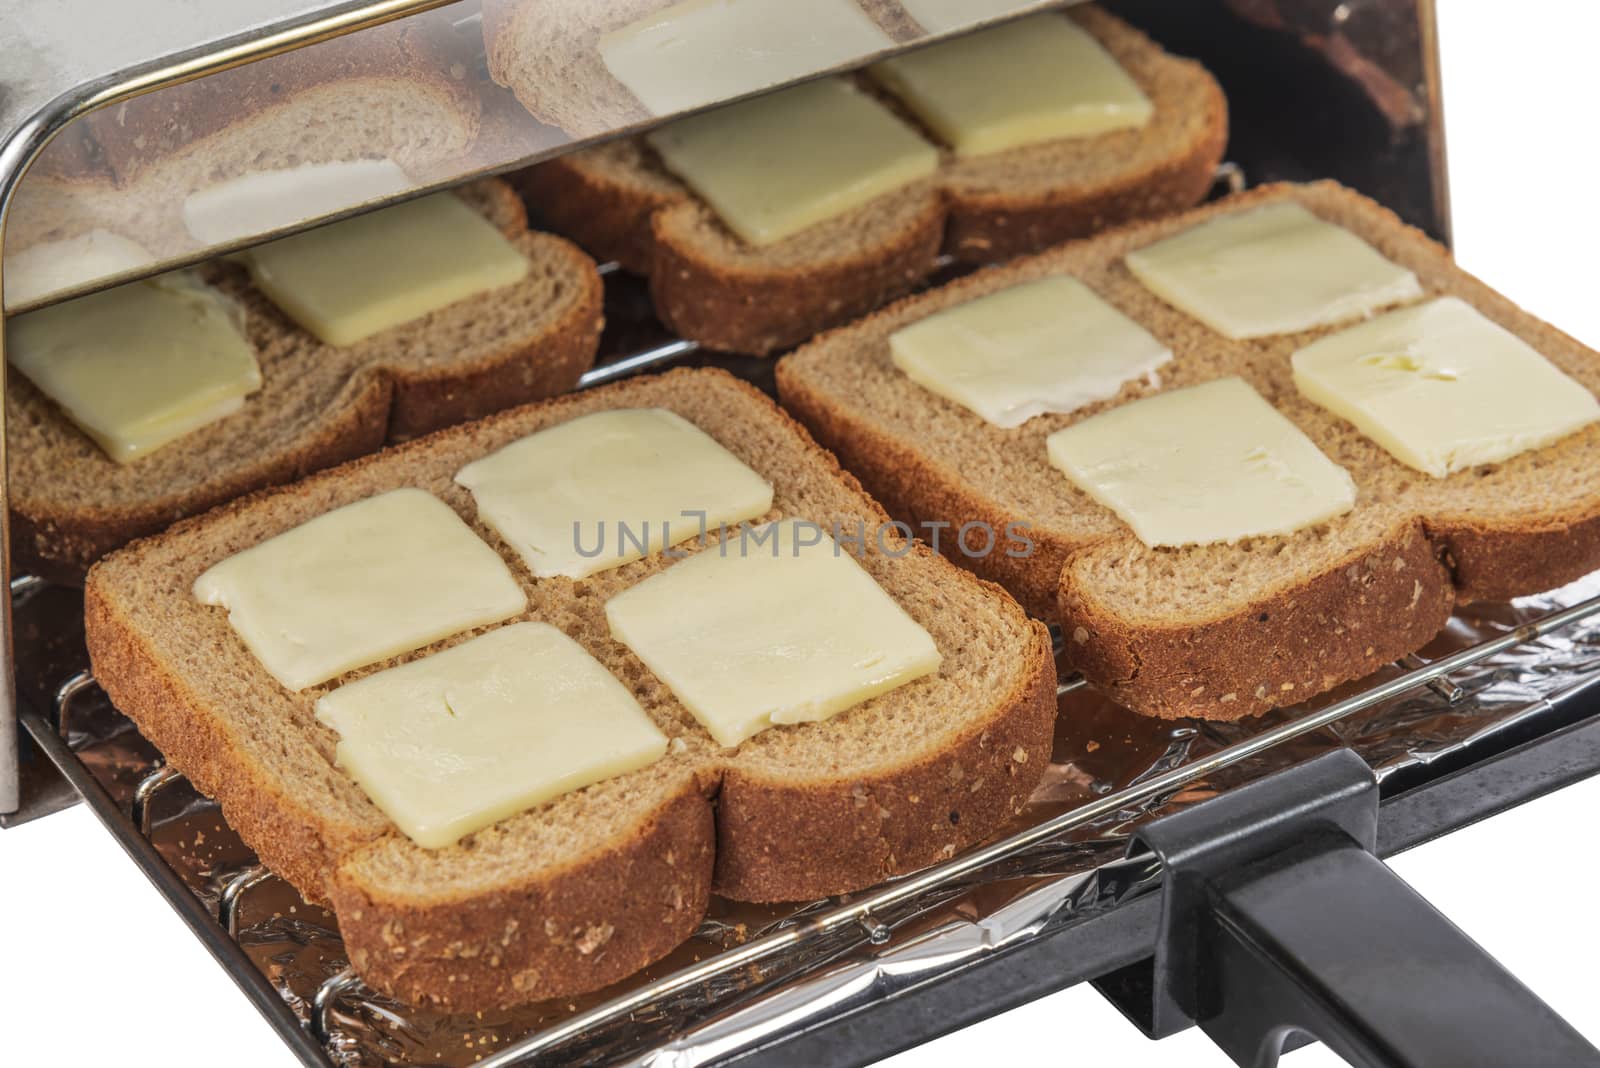 Wheat Bread And Butter About To Toast by stockbuster1